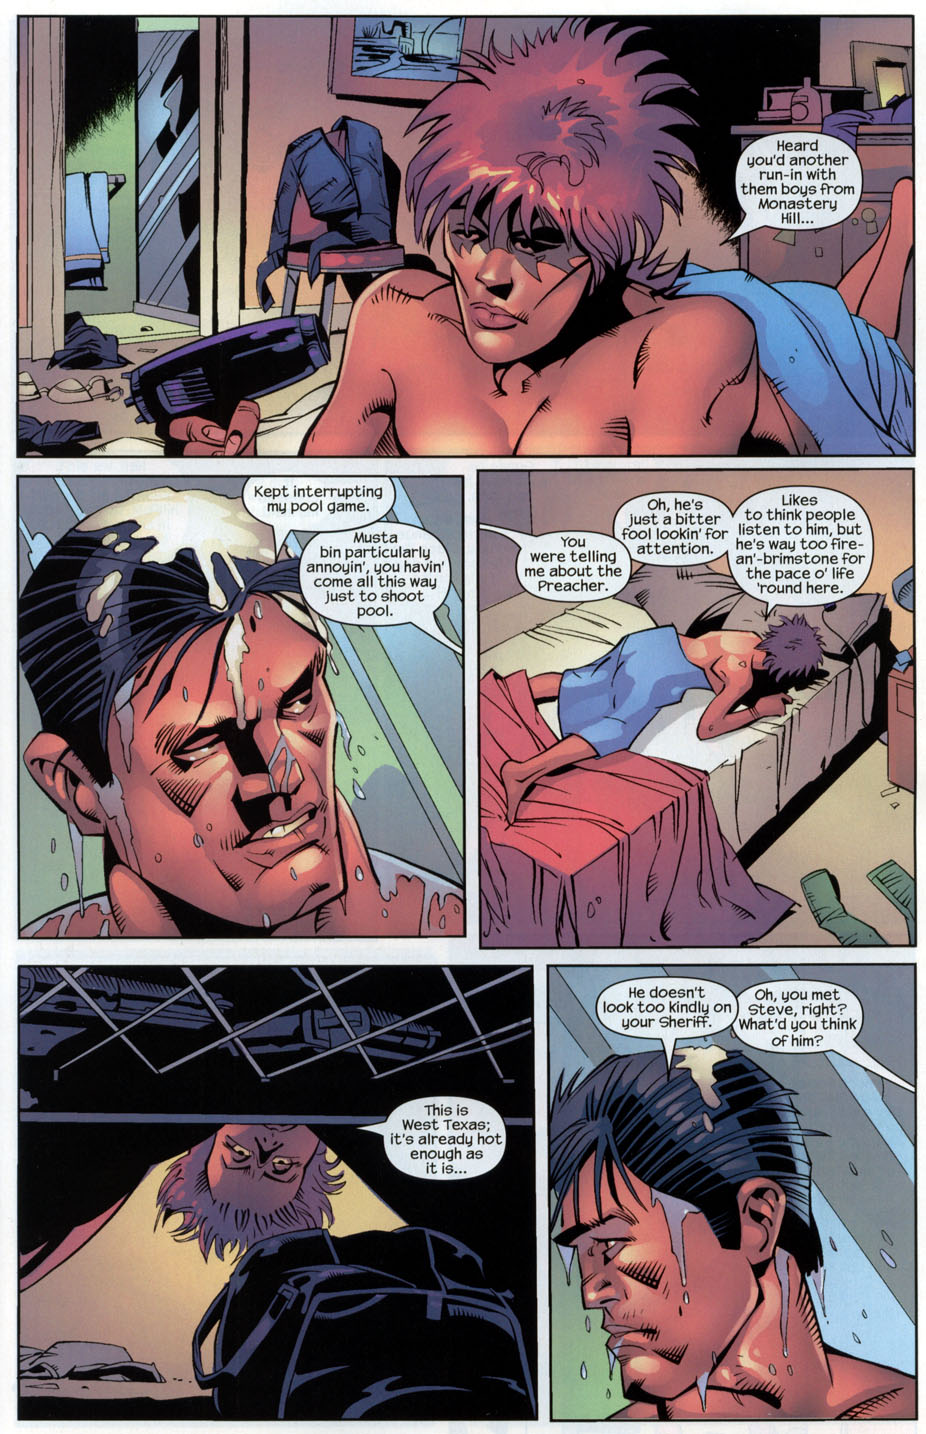 The Punisher (2001) issue 29 - Streets of Laredo #02 - Page 16